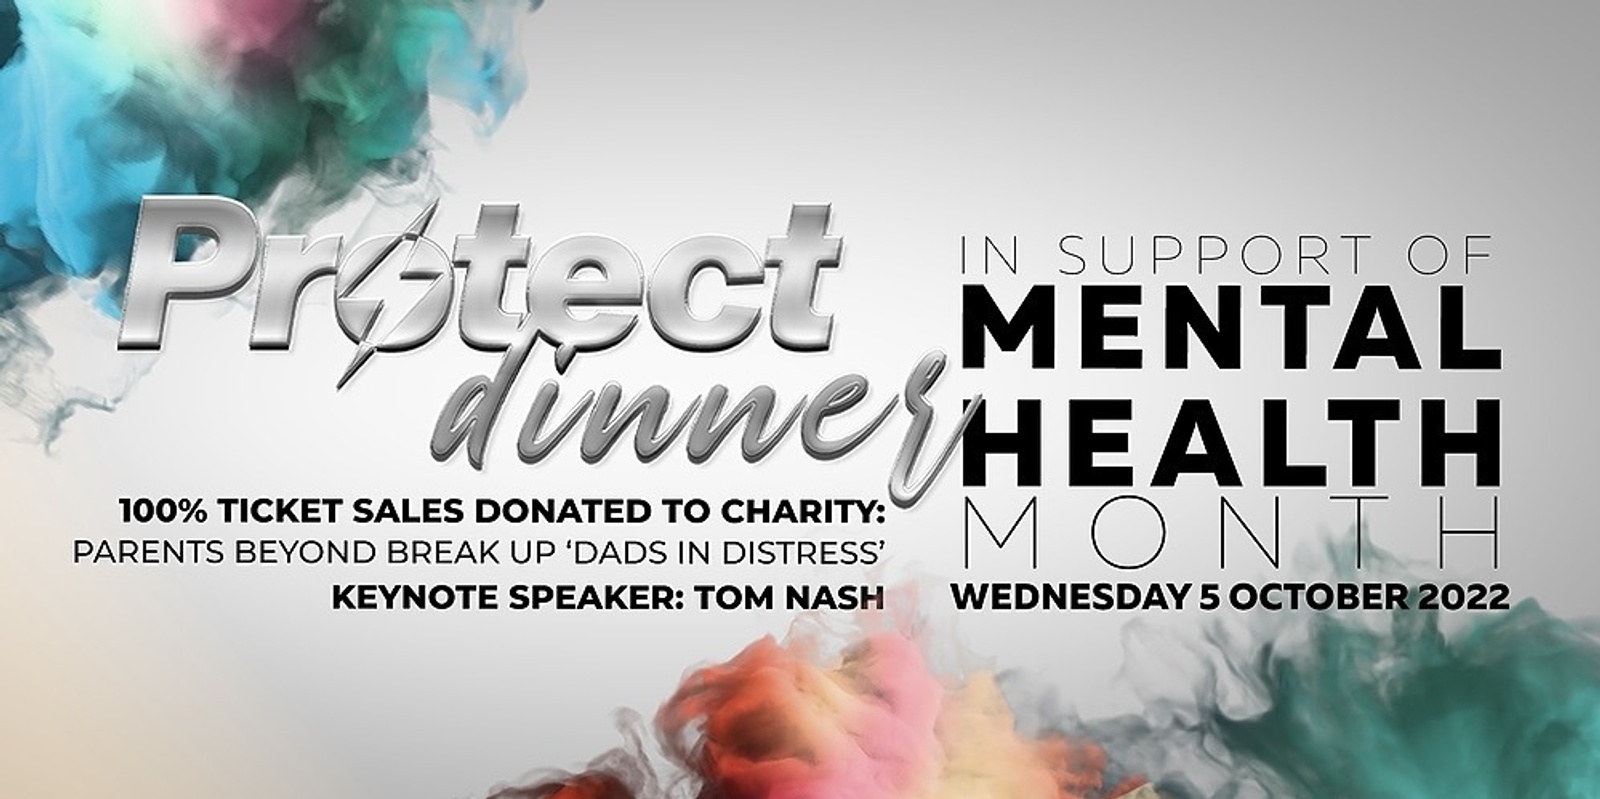 Banner image for Protect Dinner for Mental Health Month